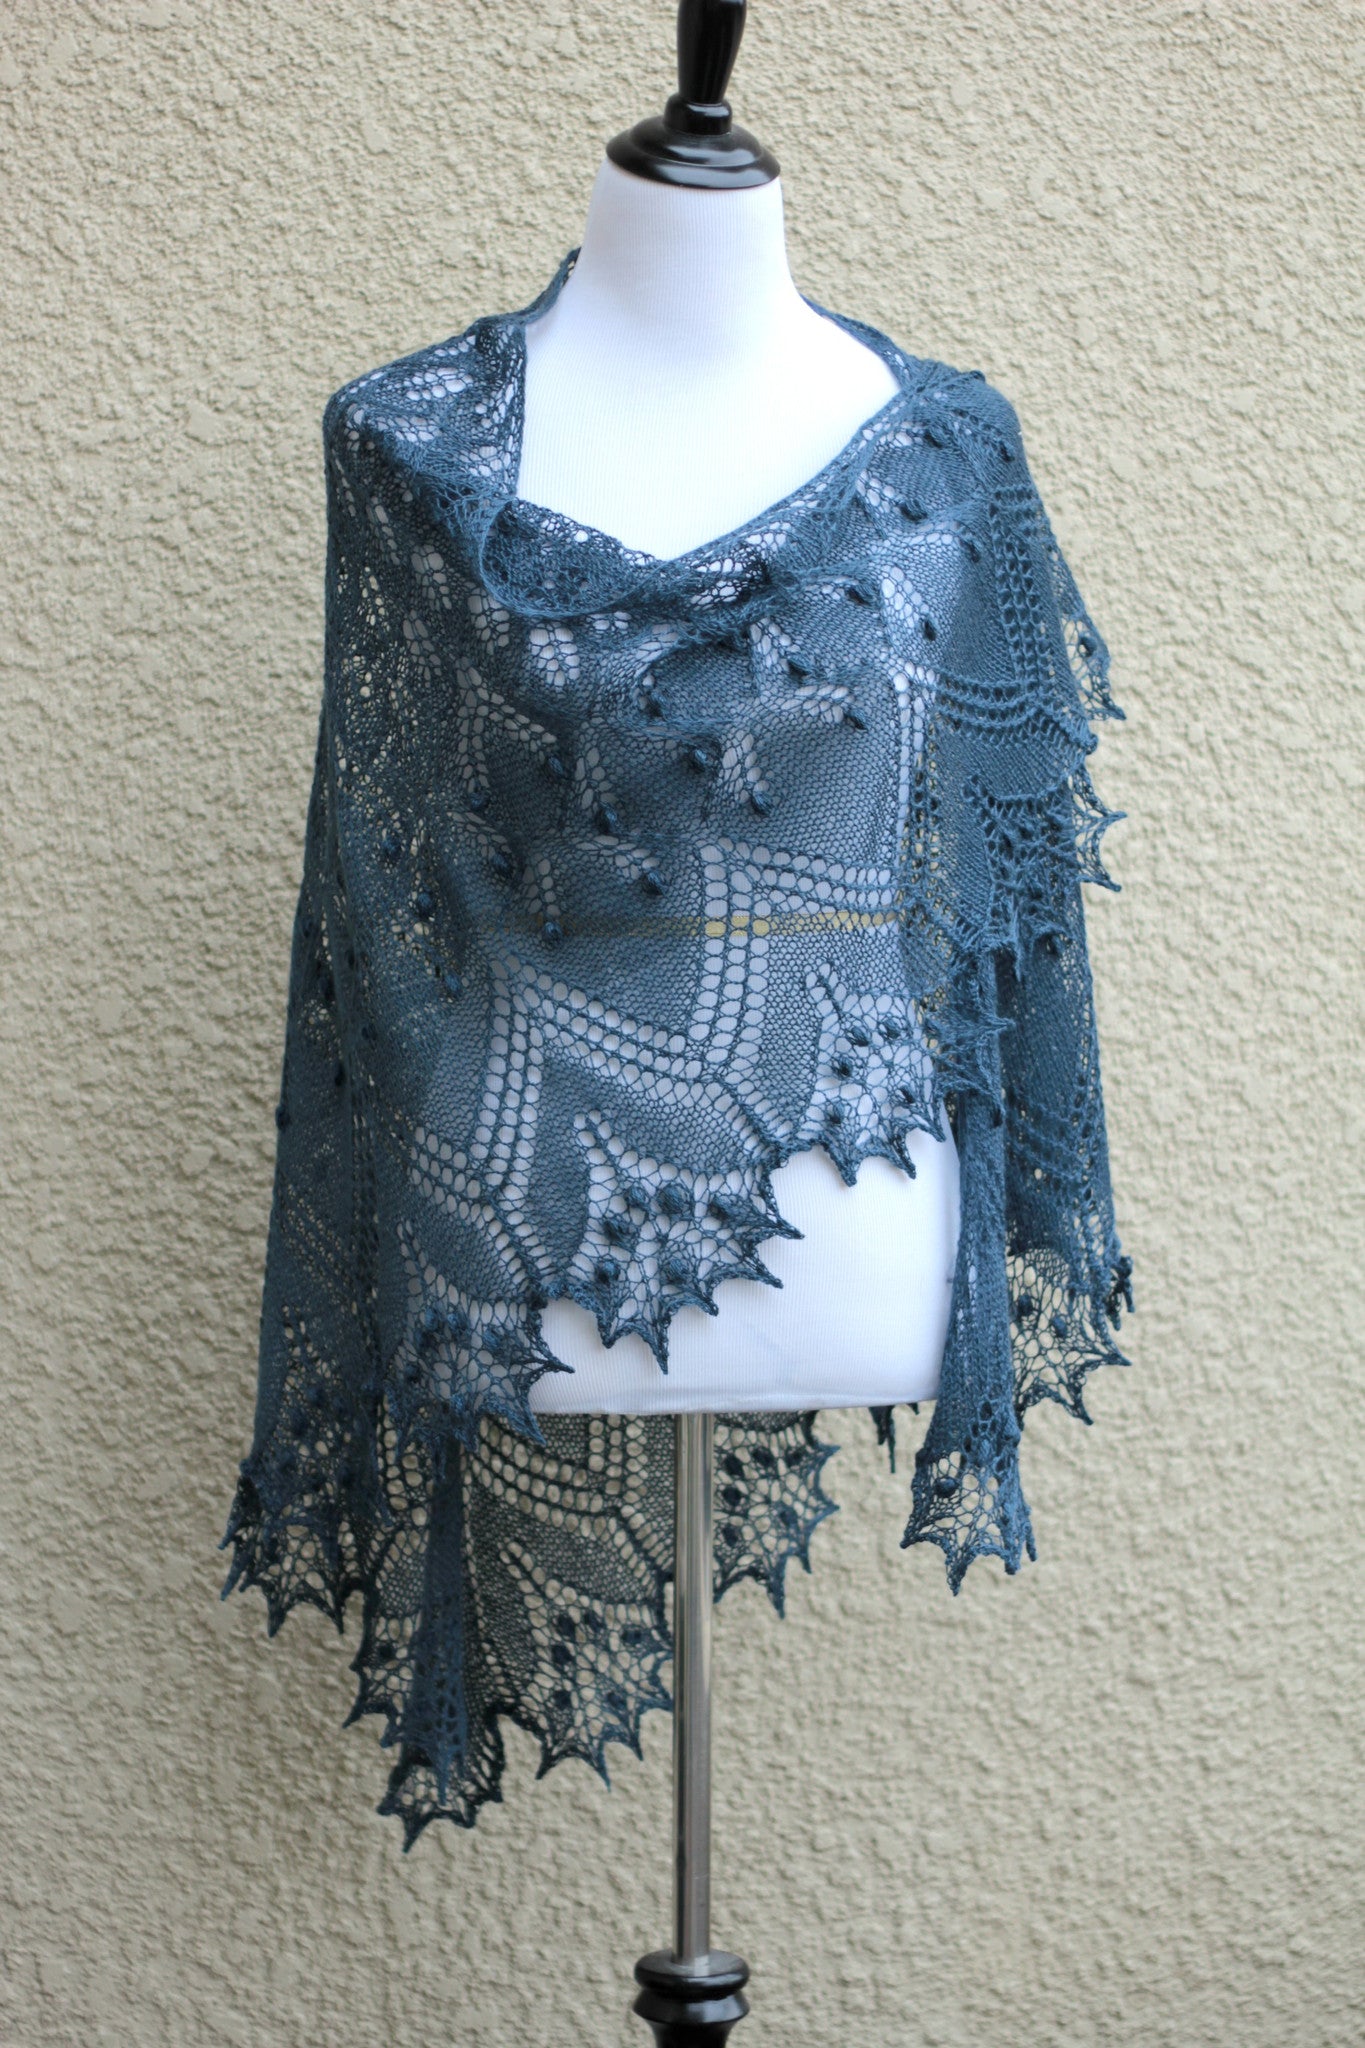 Knit lace shawl in grey blue color with nupps